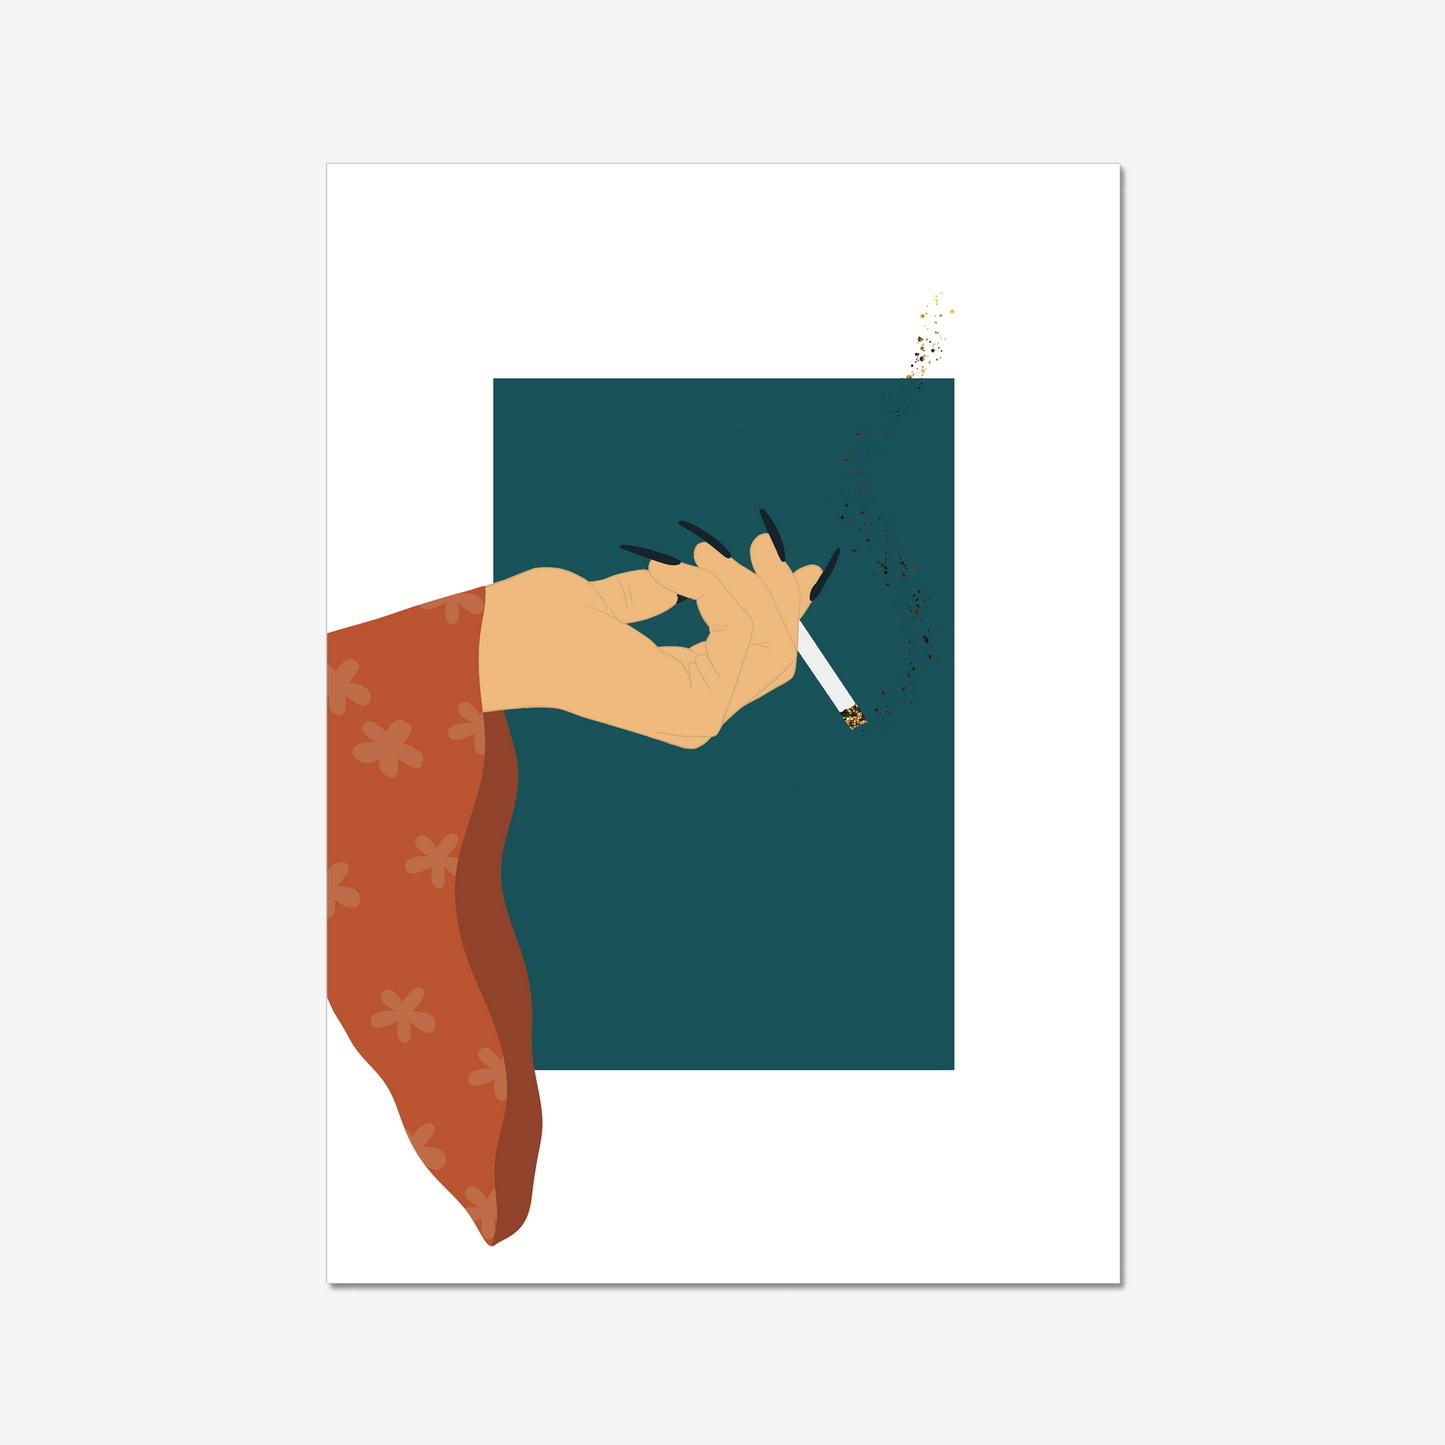 Introducing our latest art print, "Blowing Glitter". This quirky and unique design is perfect for those who love vintage-inspired pieces with a touch of glam rock eccentricity. The print features a woman's hand reaching out from a classic bell sleeve, holding a burning cigarette that is dispersing glitter into the air.